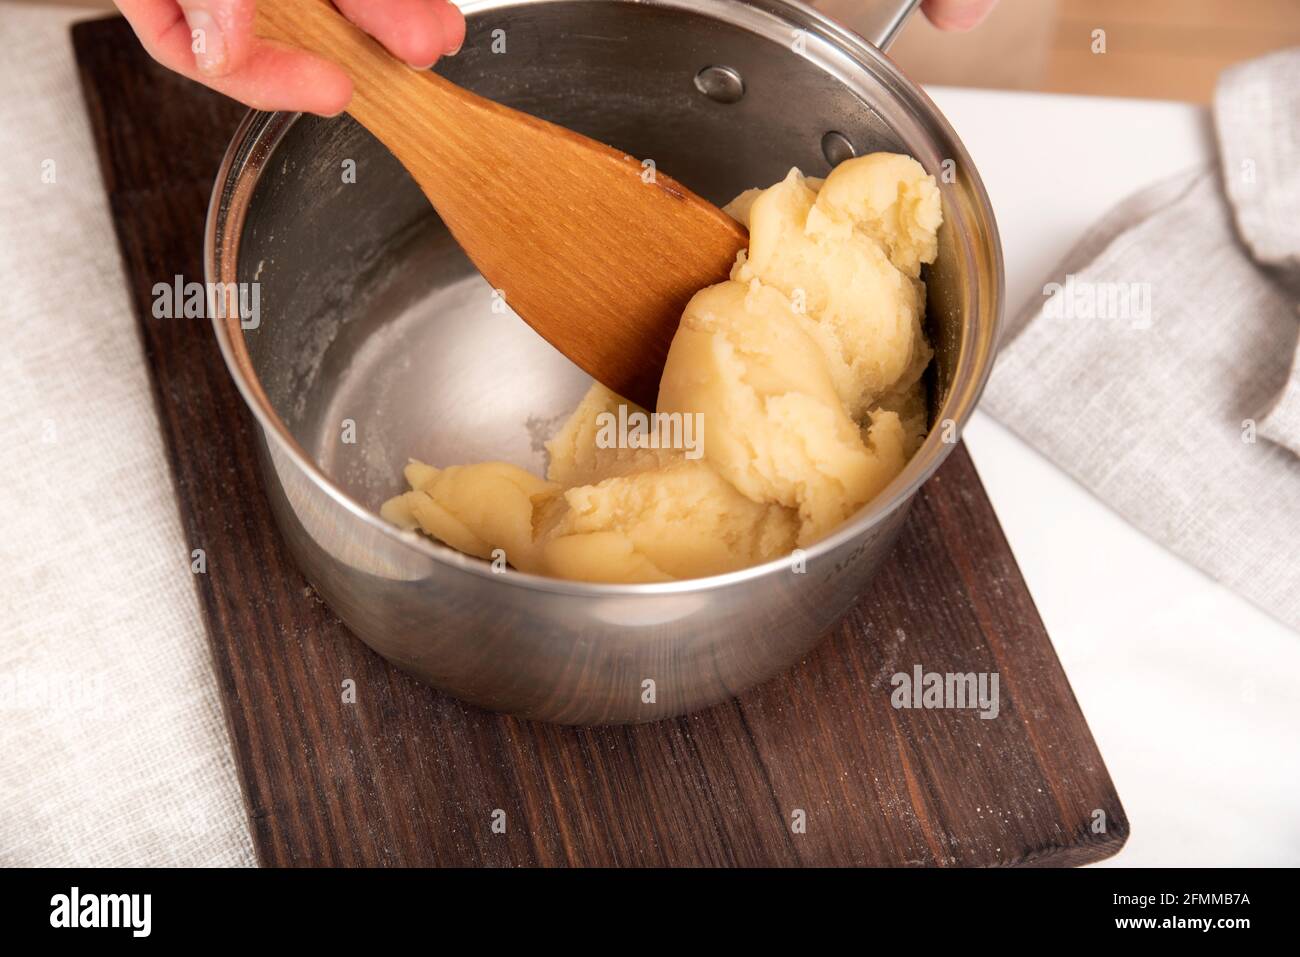 Bread dough in a metal mixing bowl - Stock Image - F016/4152 - Science  Photo Library